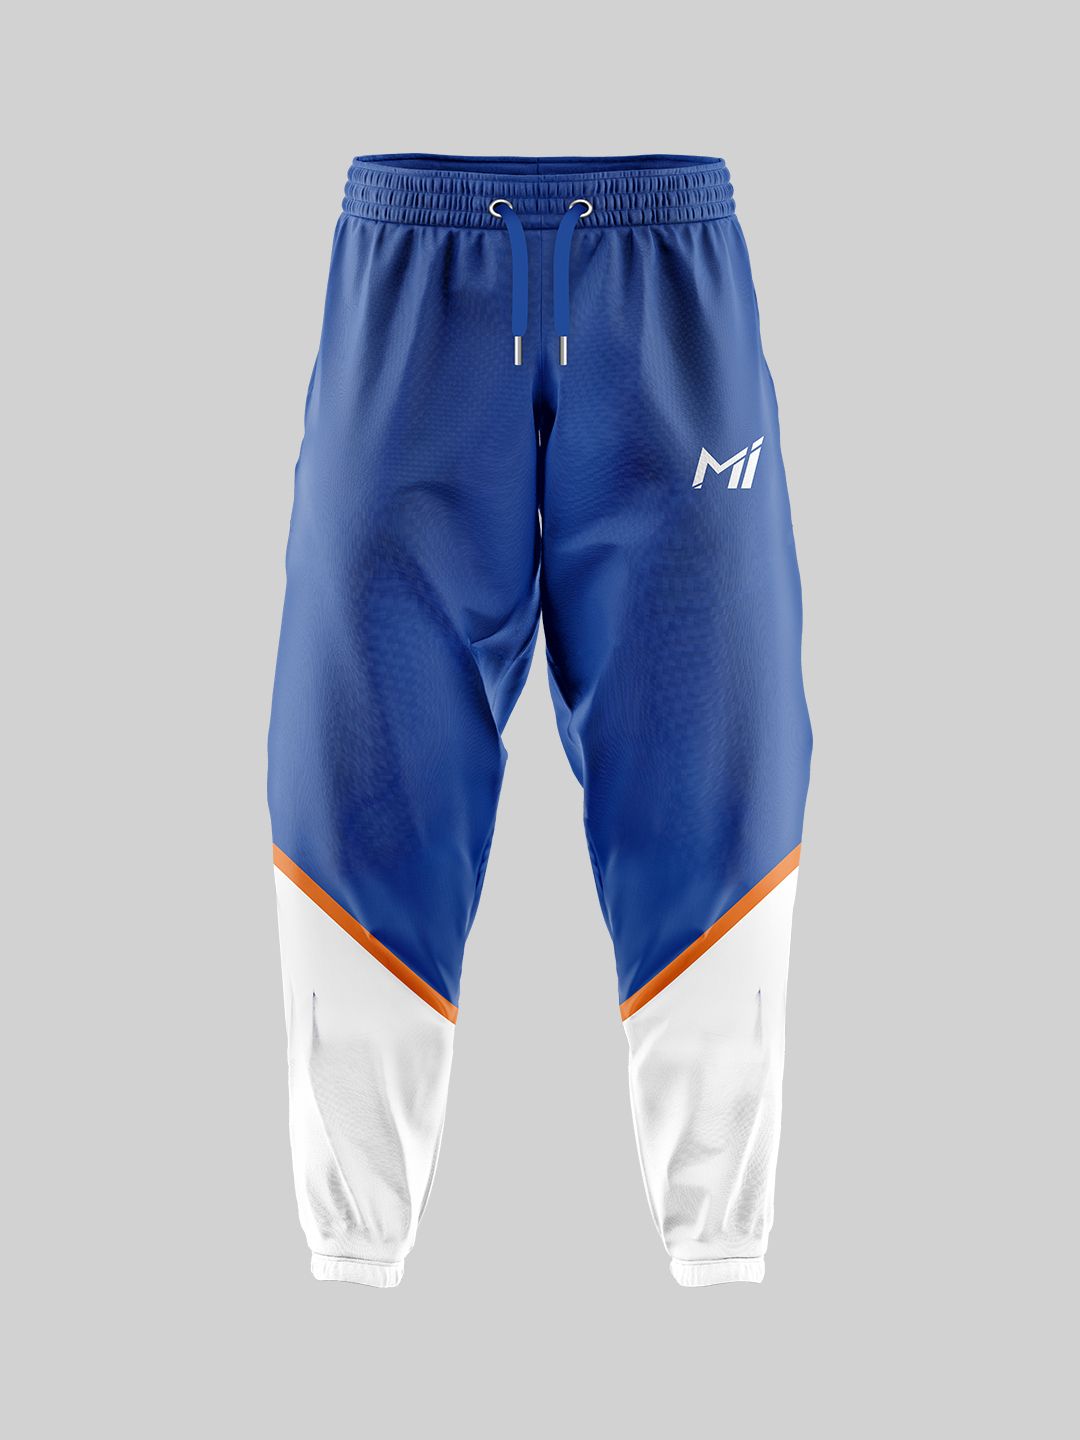 Joggers Pants at Rs 500/piece, Jogger Pants in Anand